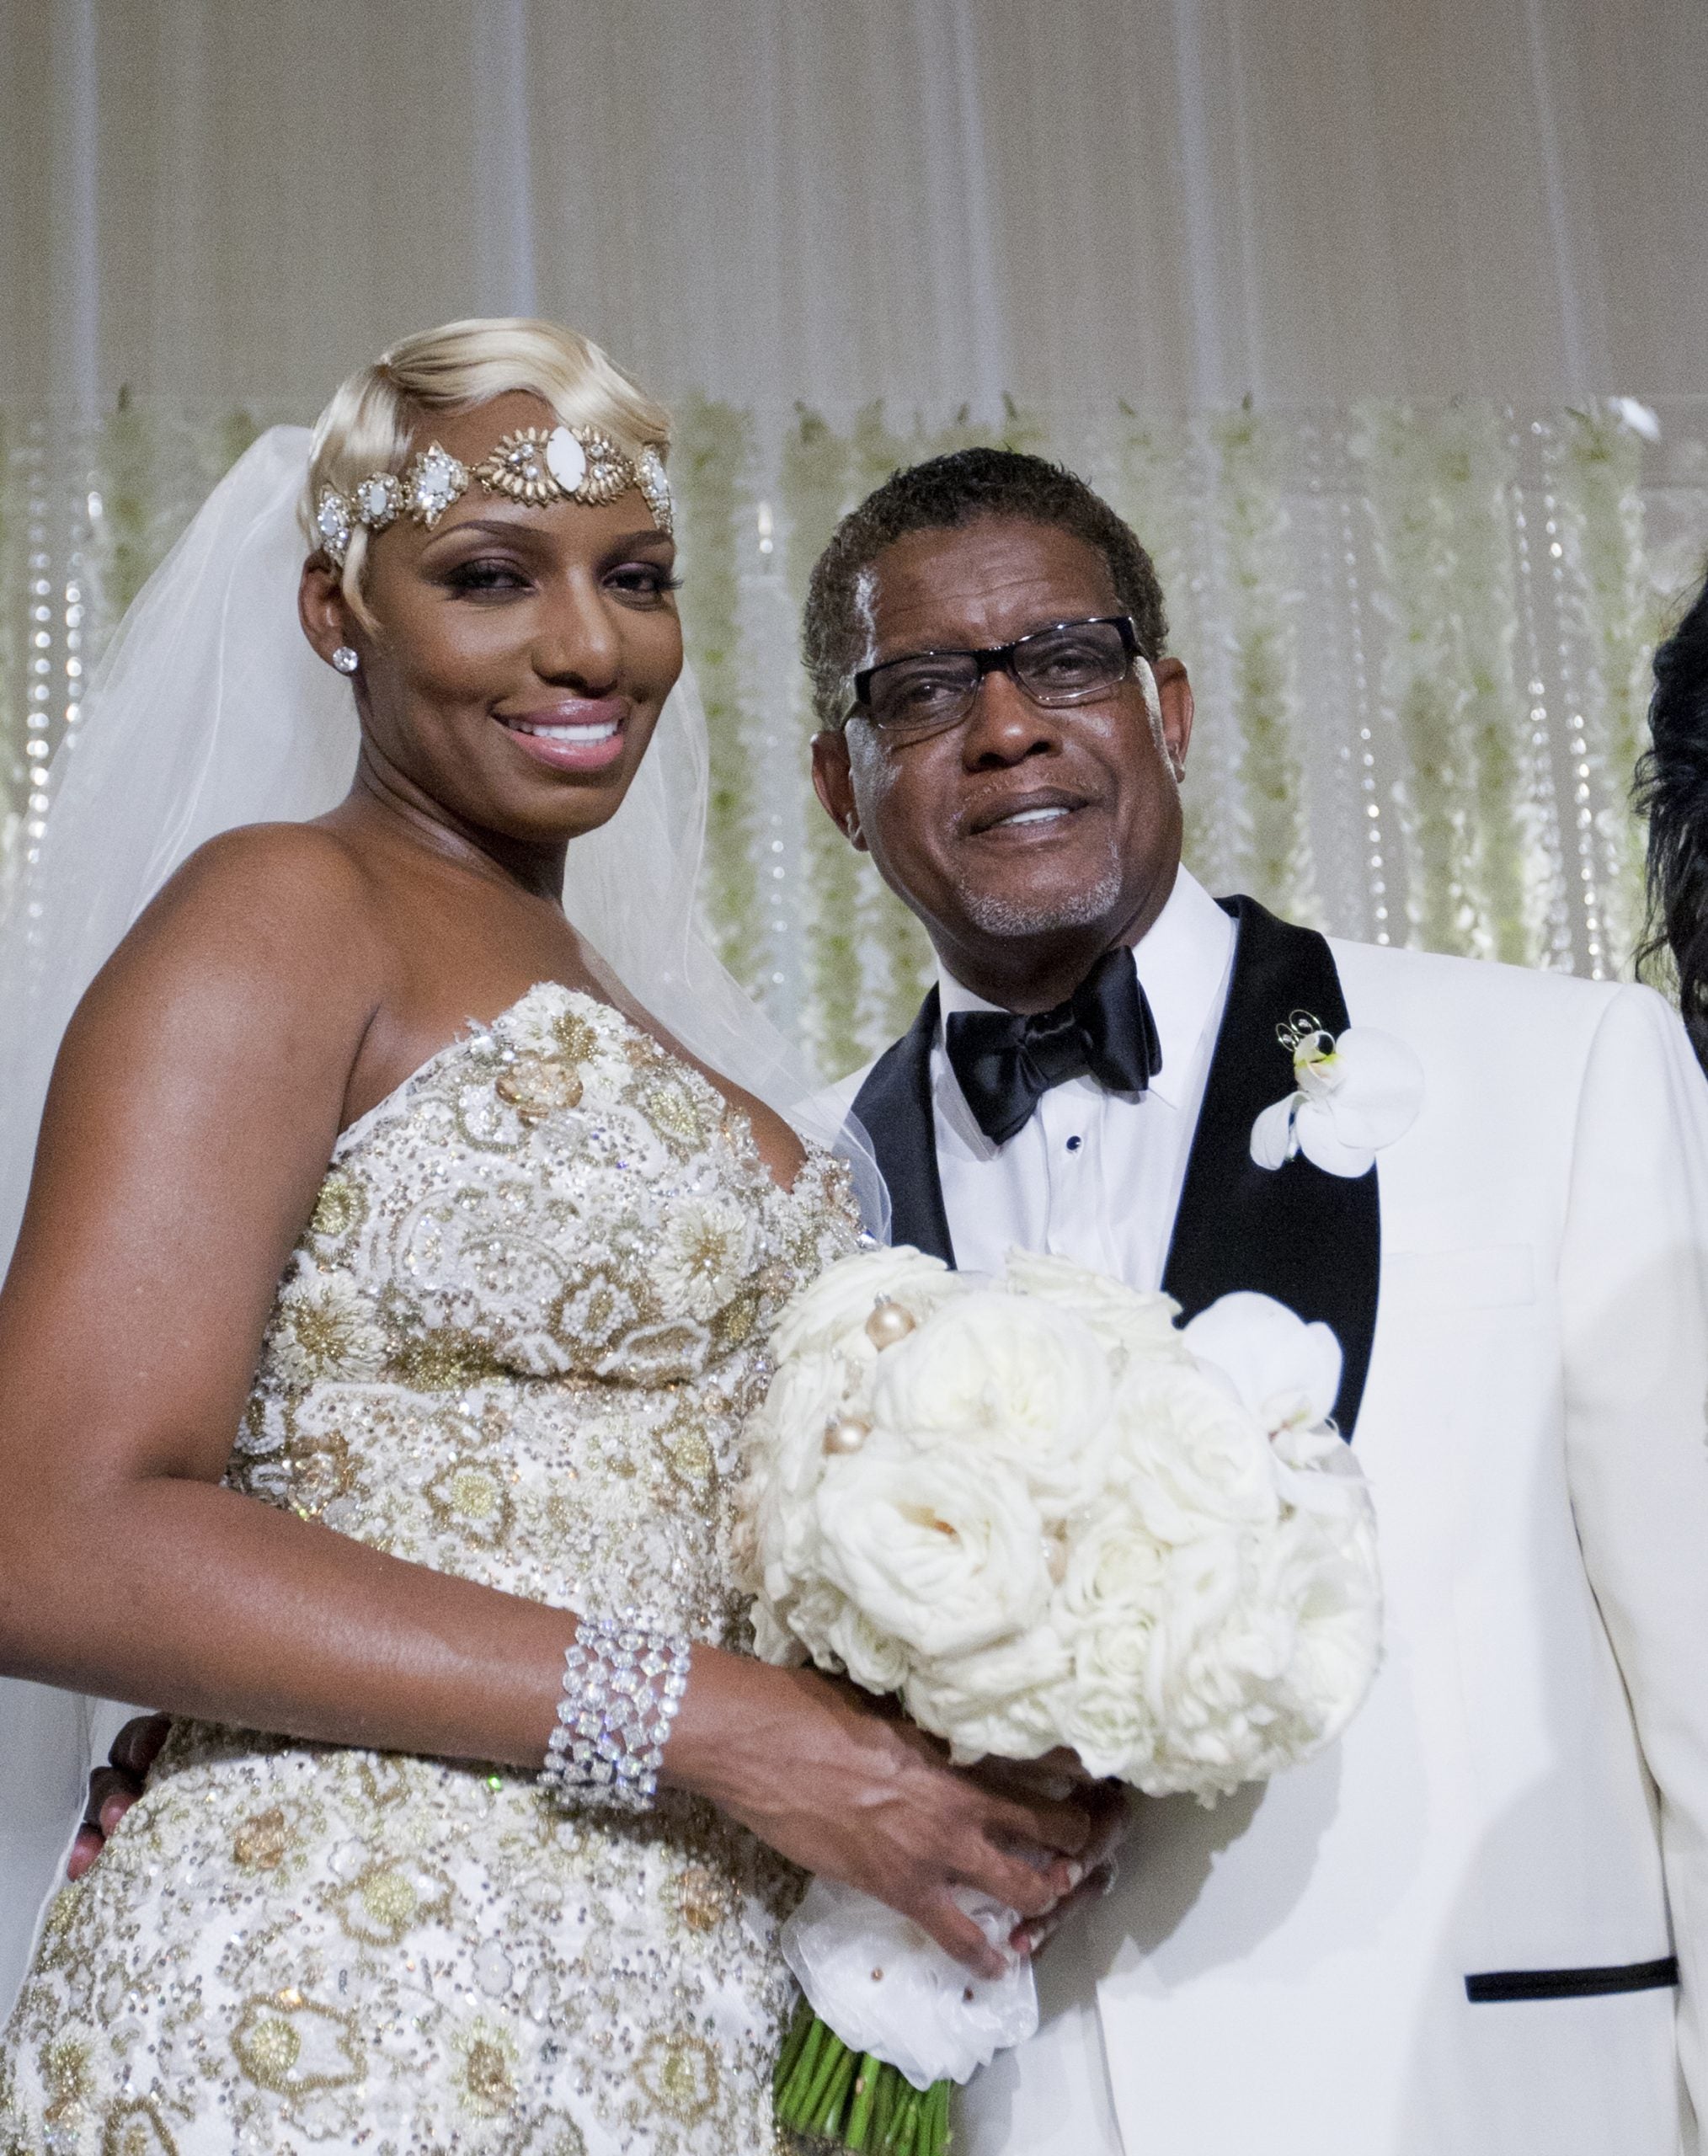 NeNe Leakes' Husband Gregg Leakes Passes Away From Colon Cancer At Age 66